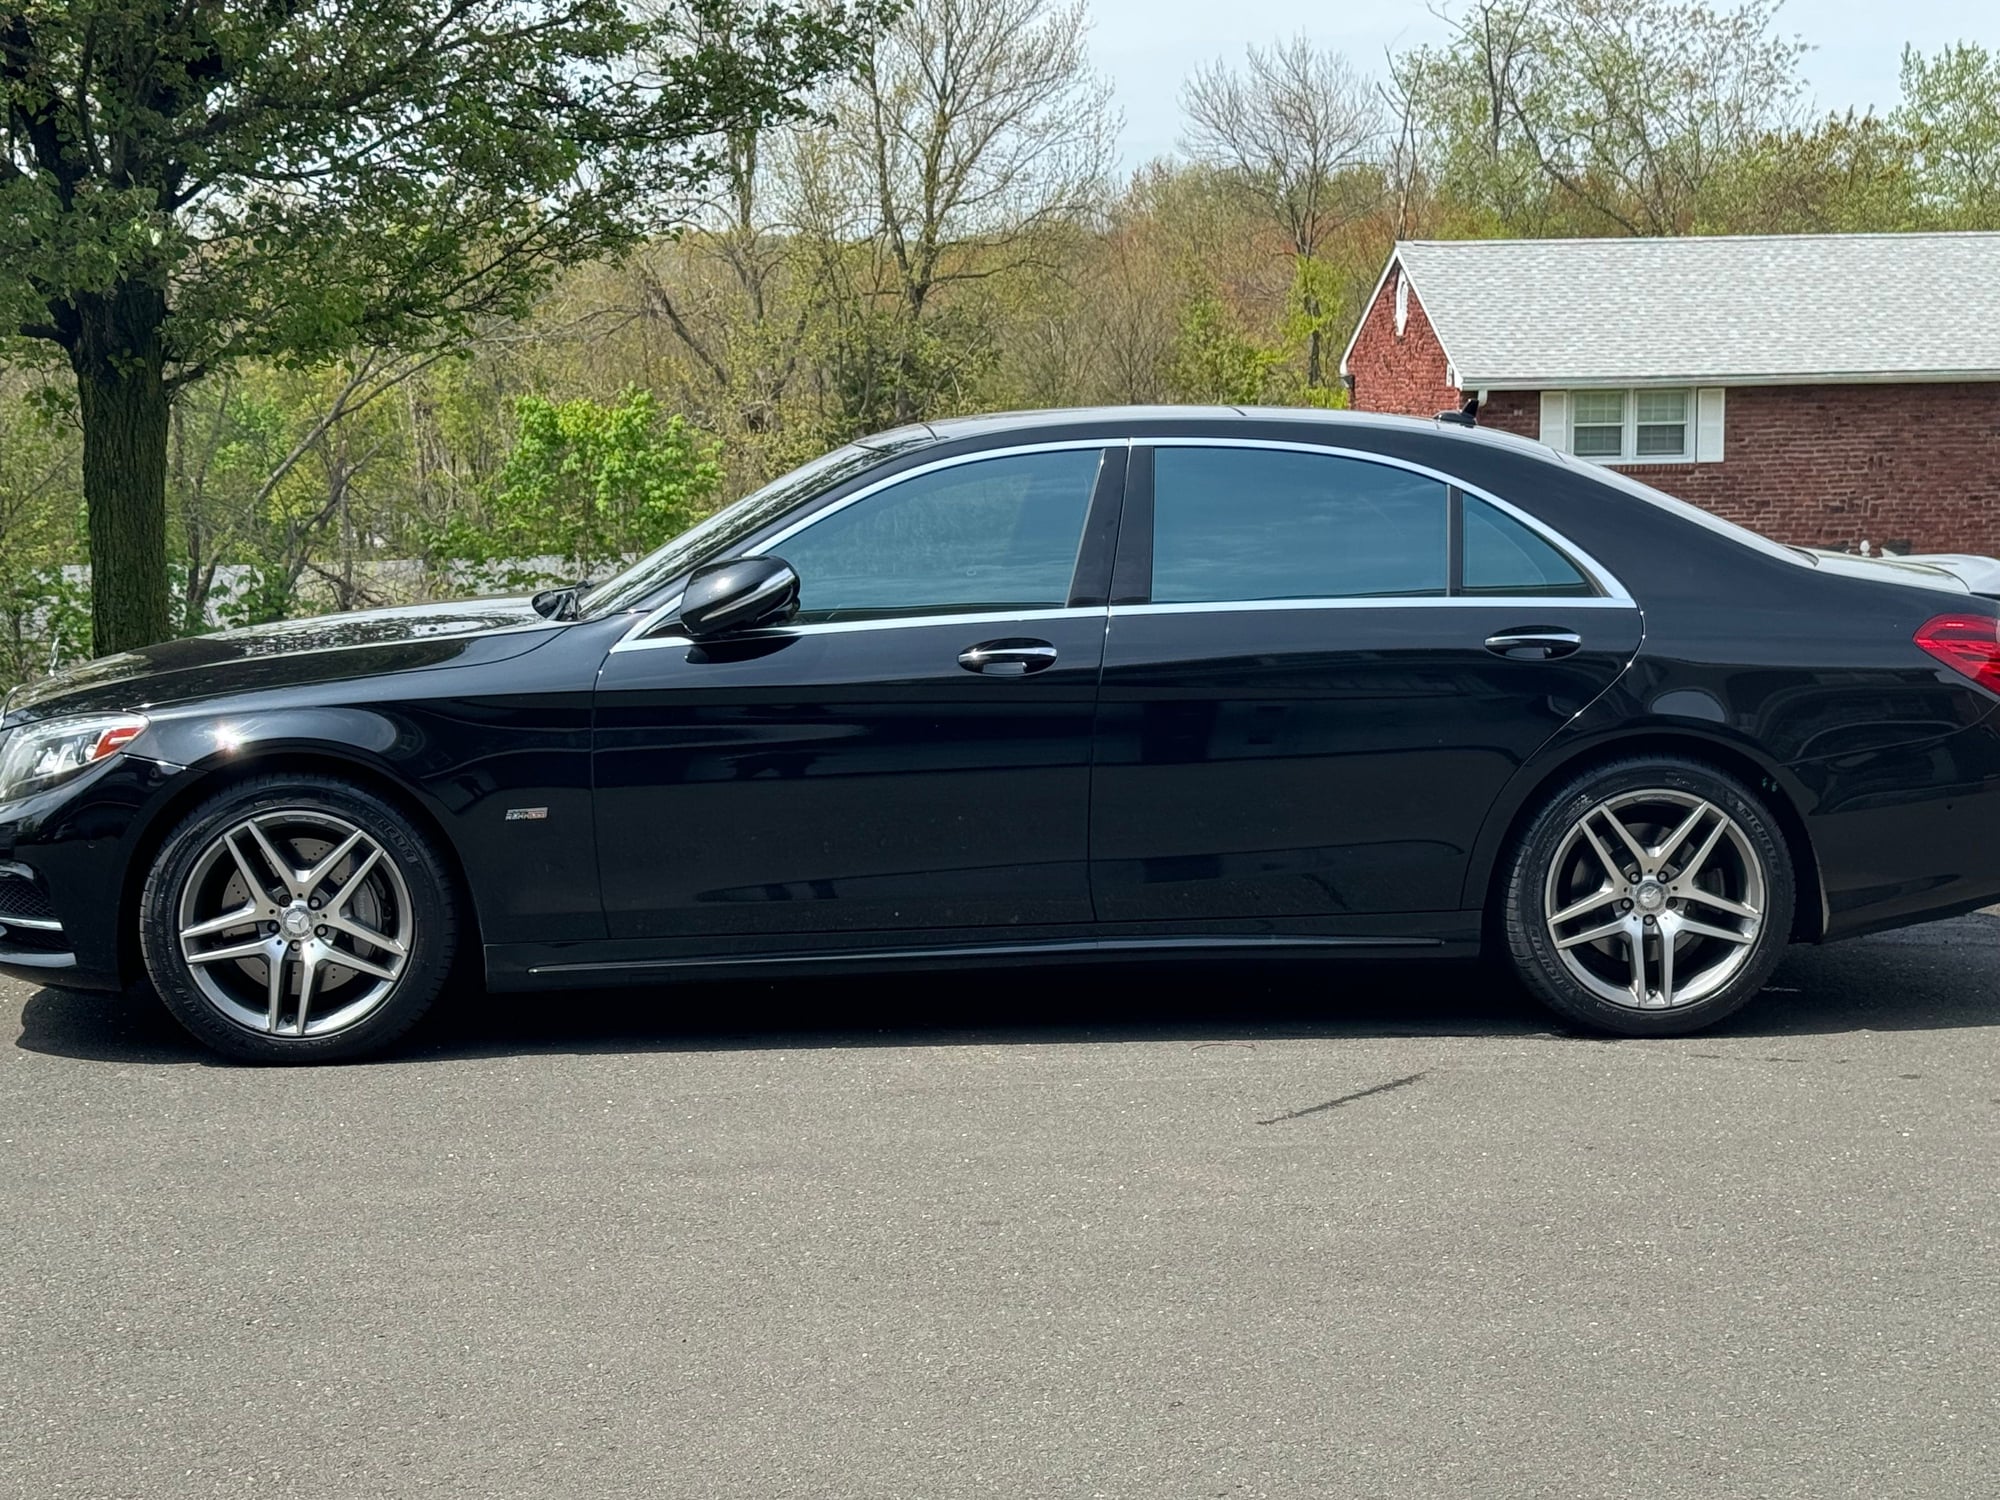 2015 Mercedes-Benz S550 - 2015 s550 renntech for sale - Used - VIN FA150069 - 104,000 Miles - 8 cyl - Automatic - Sedan - Black - Vernon, CT 06066, United States